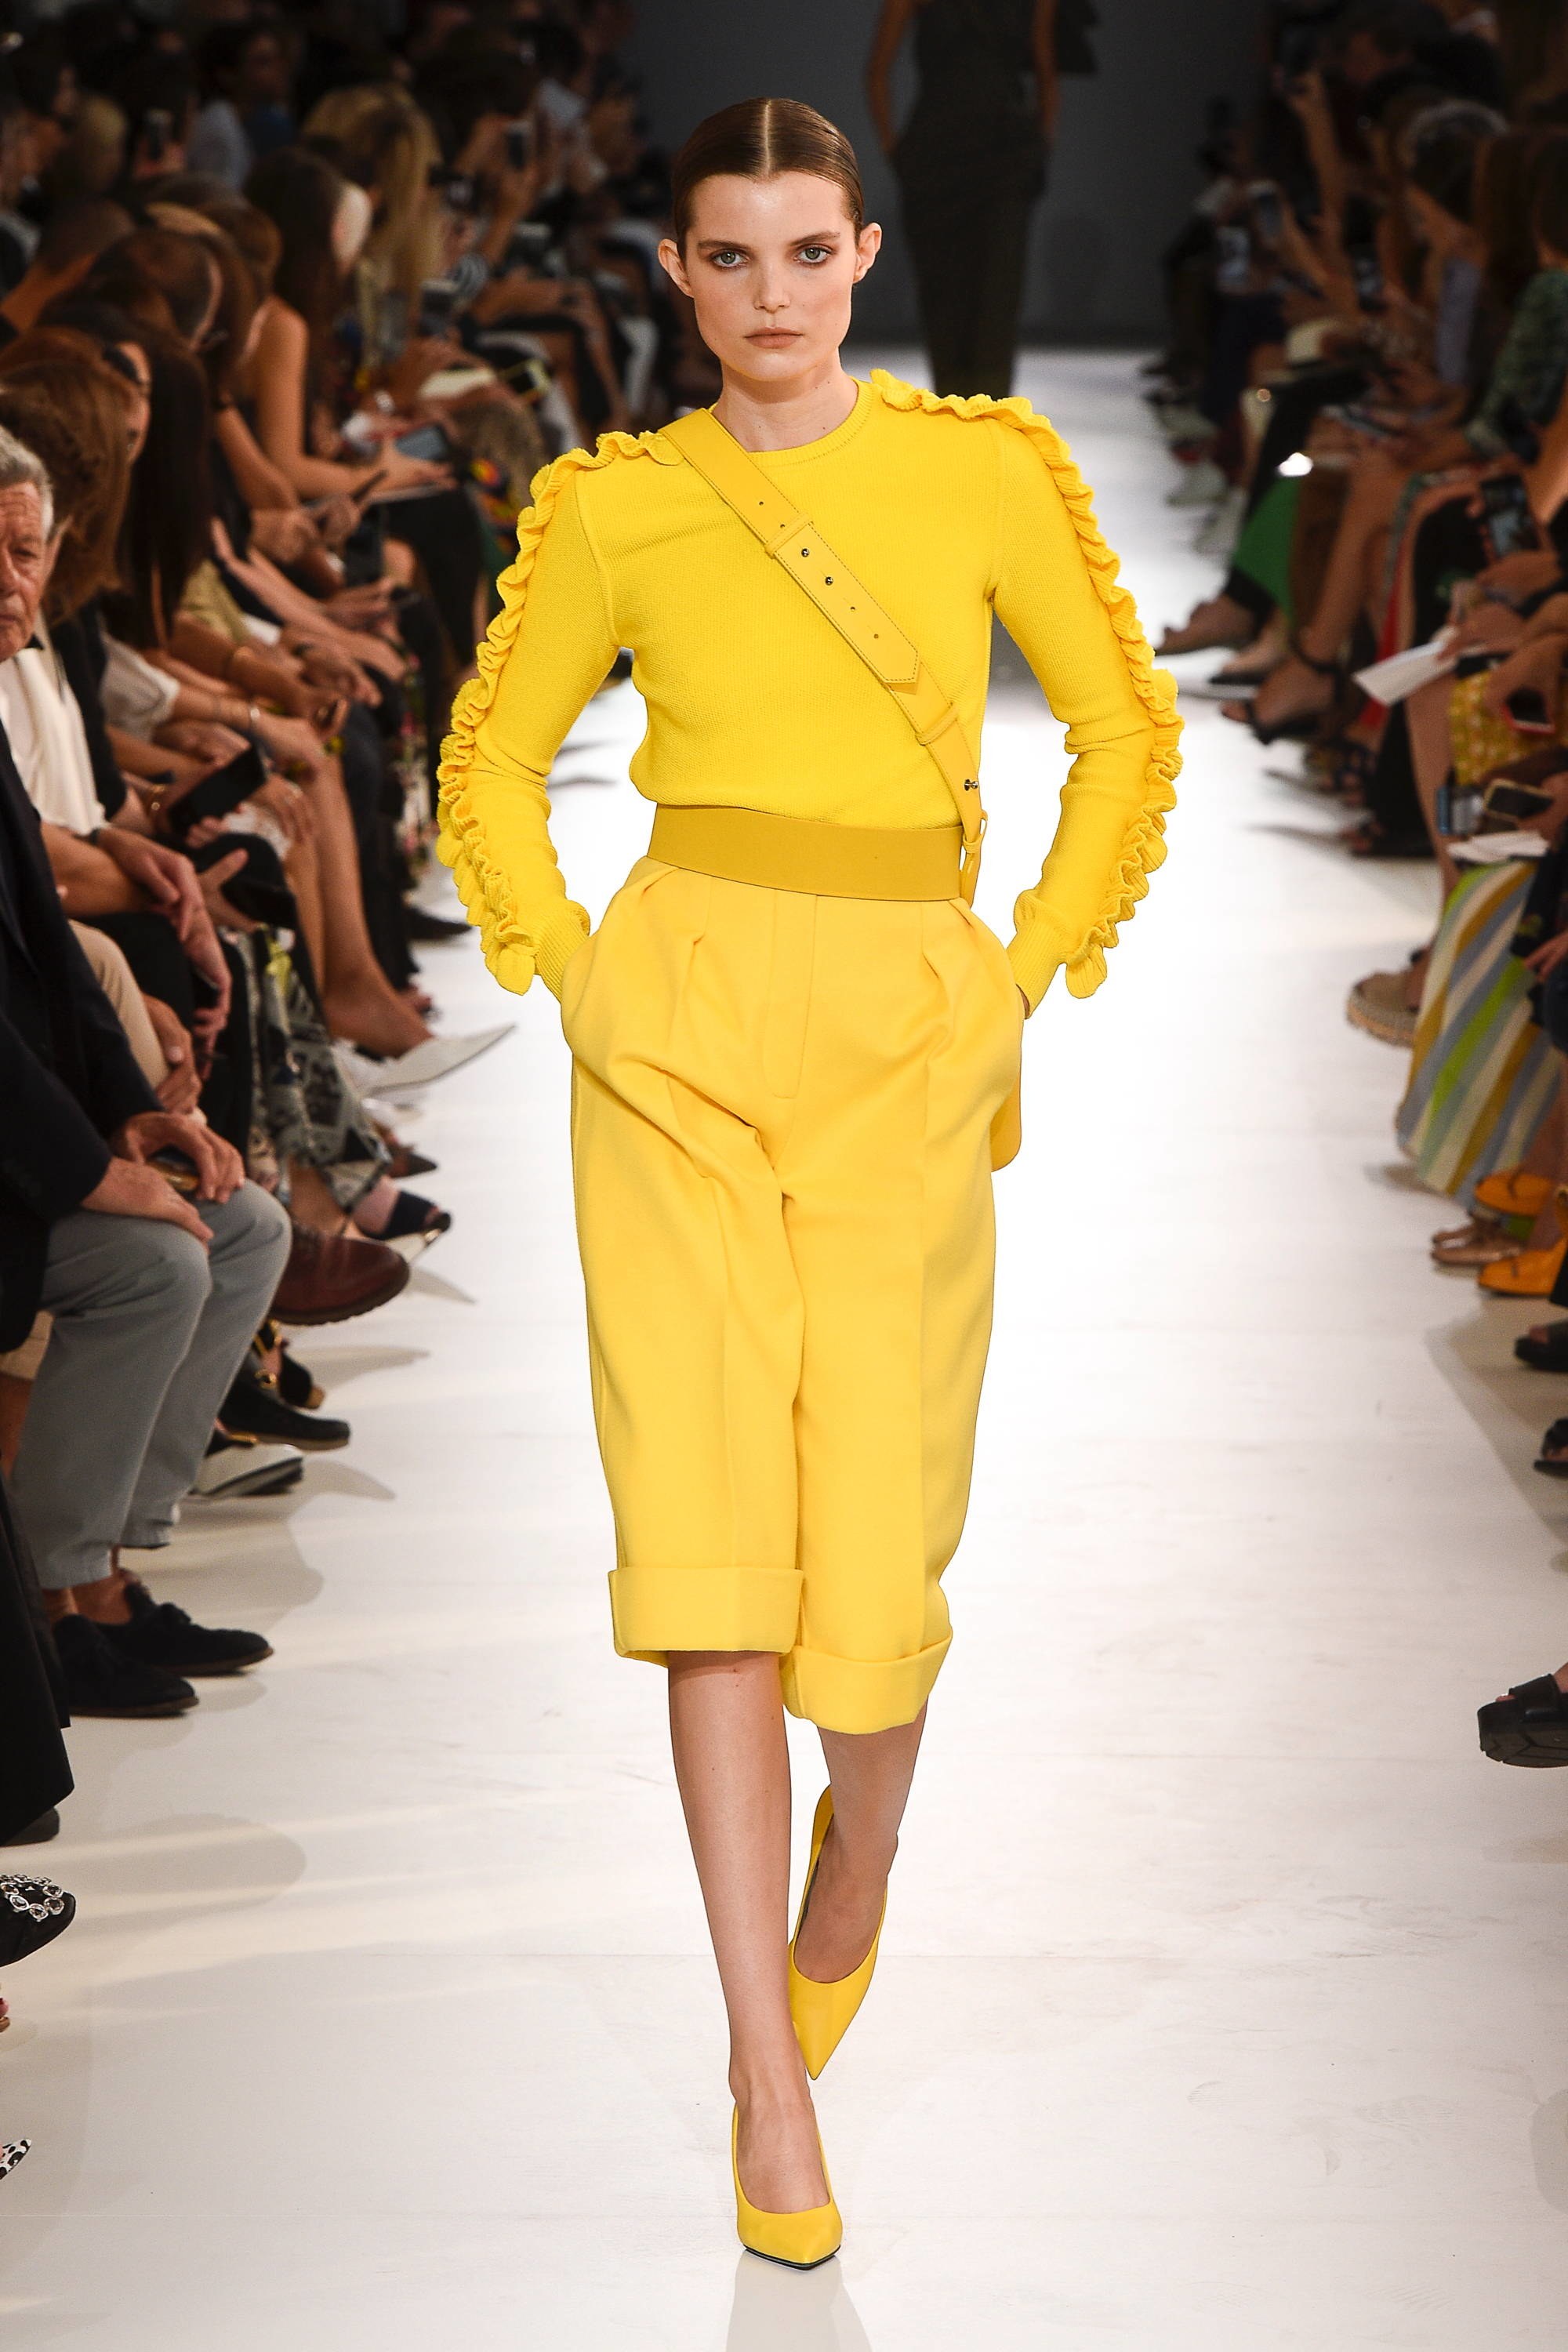 MFW: Max Mara SS19 Collection Is Elegantly Structured With Bold ...